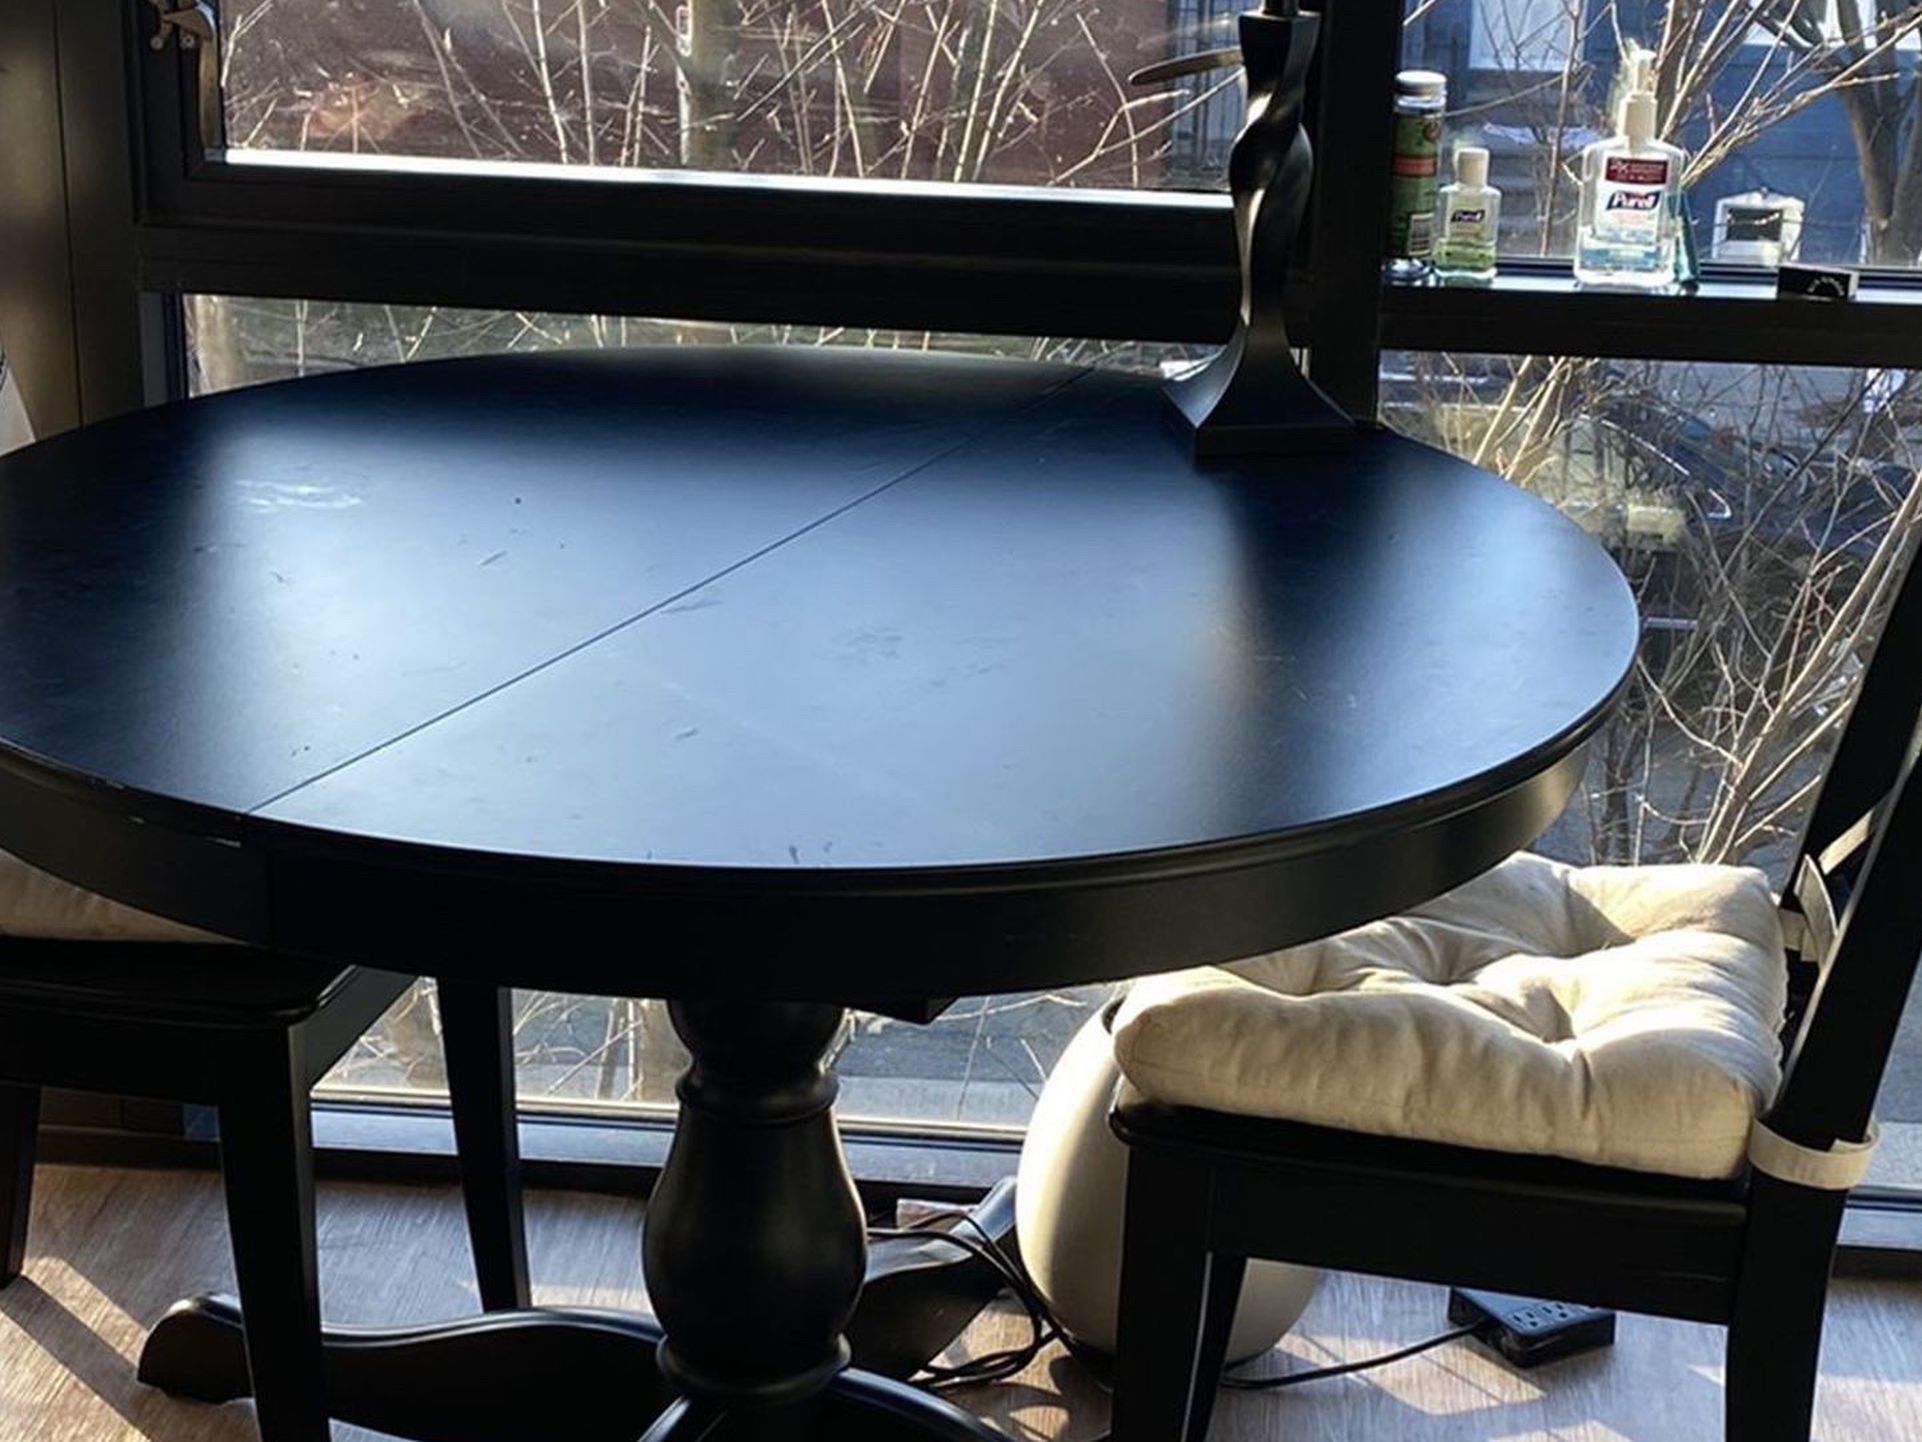 Black Dining Room Table With Four Chairs Originally From IKEA. Comes With Eggshell Colored Seat Cushions. Table Can Expand From Internal Leaf.